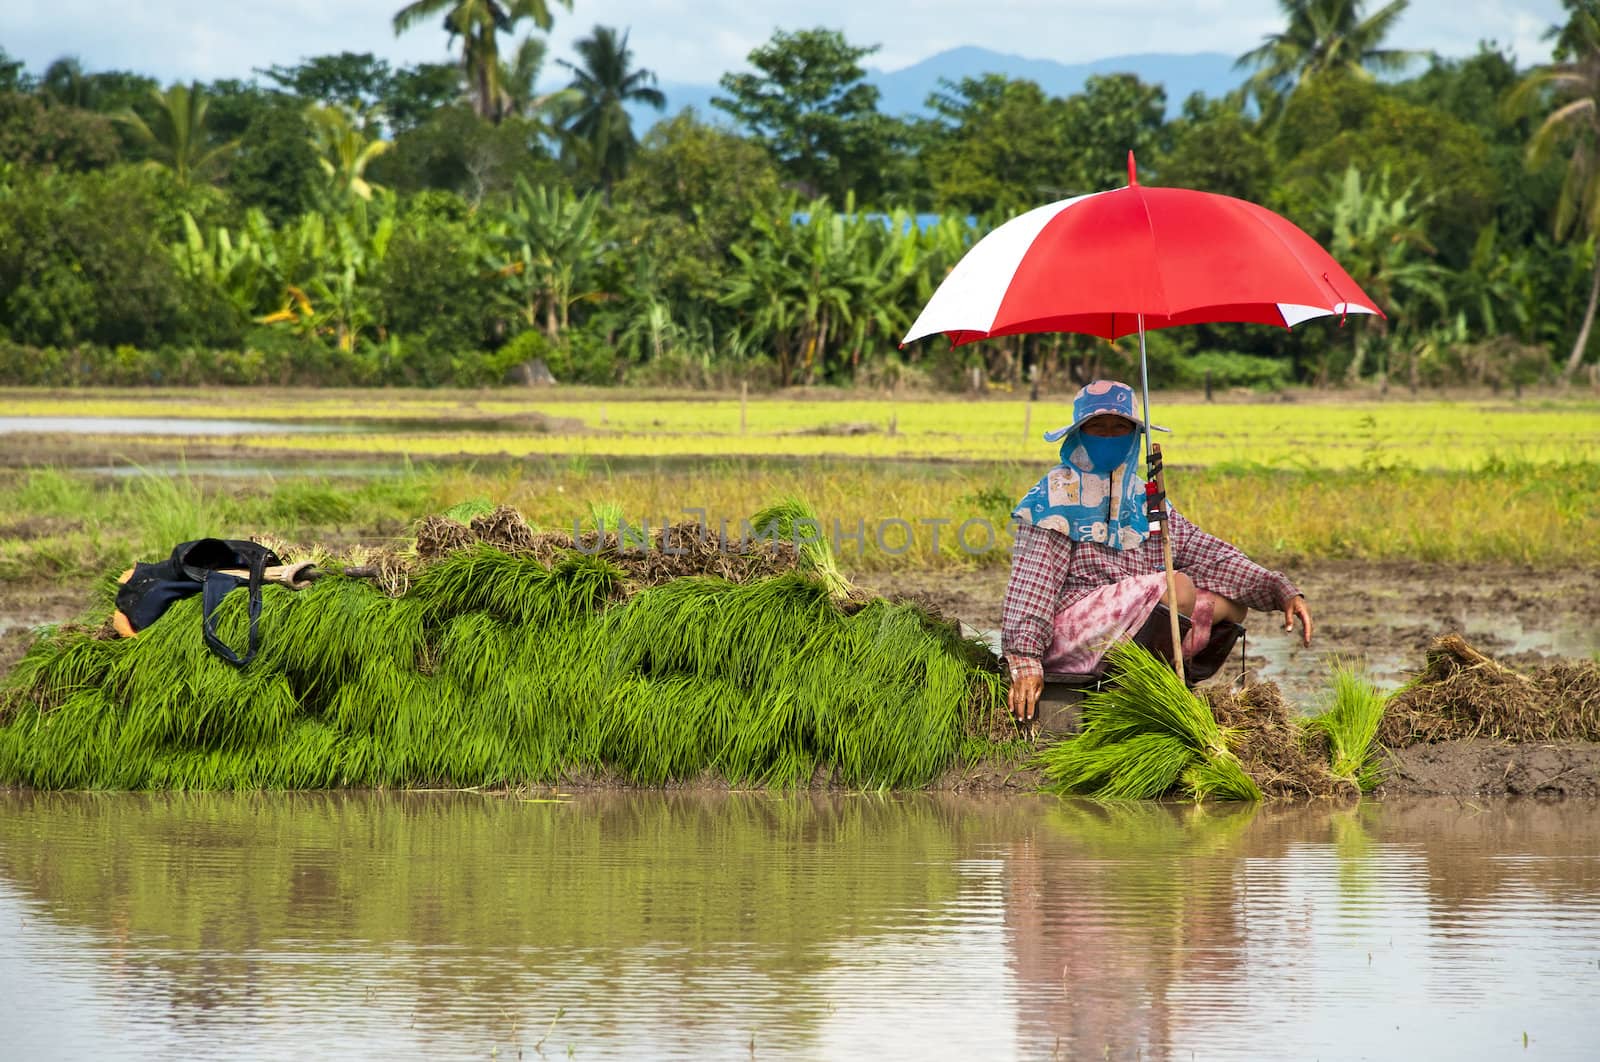 Farmers working planting rice in the paddy field by Yuri2012